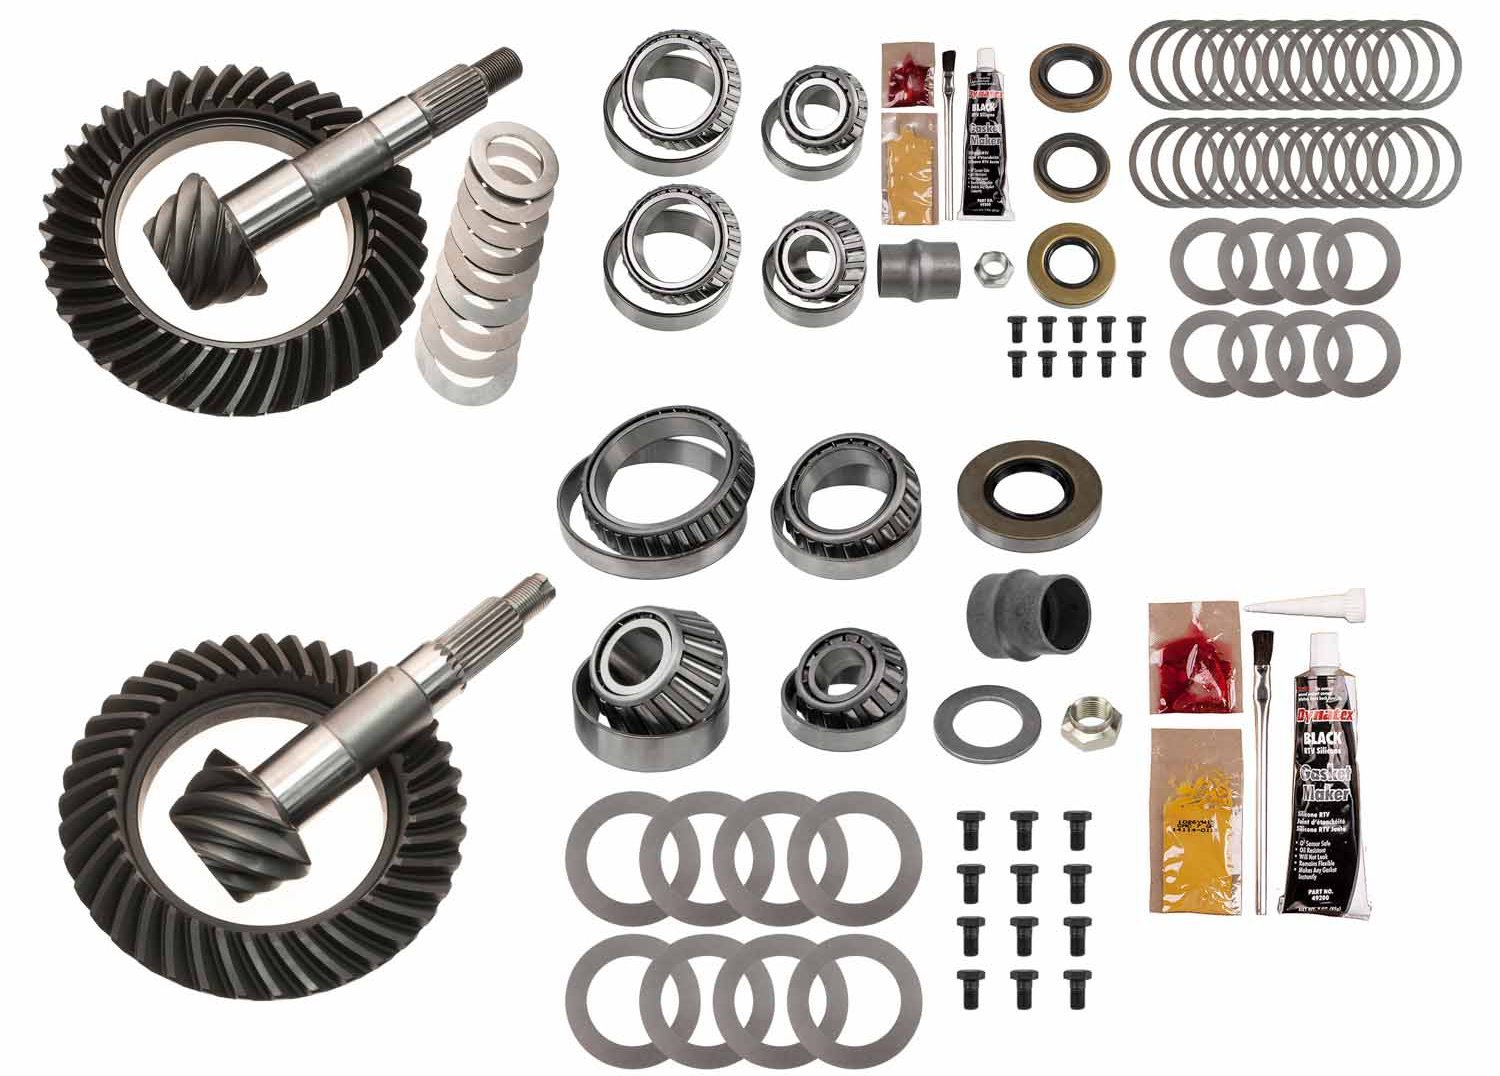 Complete Front and Rear Ring and Pinion Kit 1995-2002 Toyota Tacoma, 1996-2002 Toyota 4Runner - 4.88 Ratio